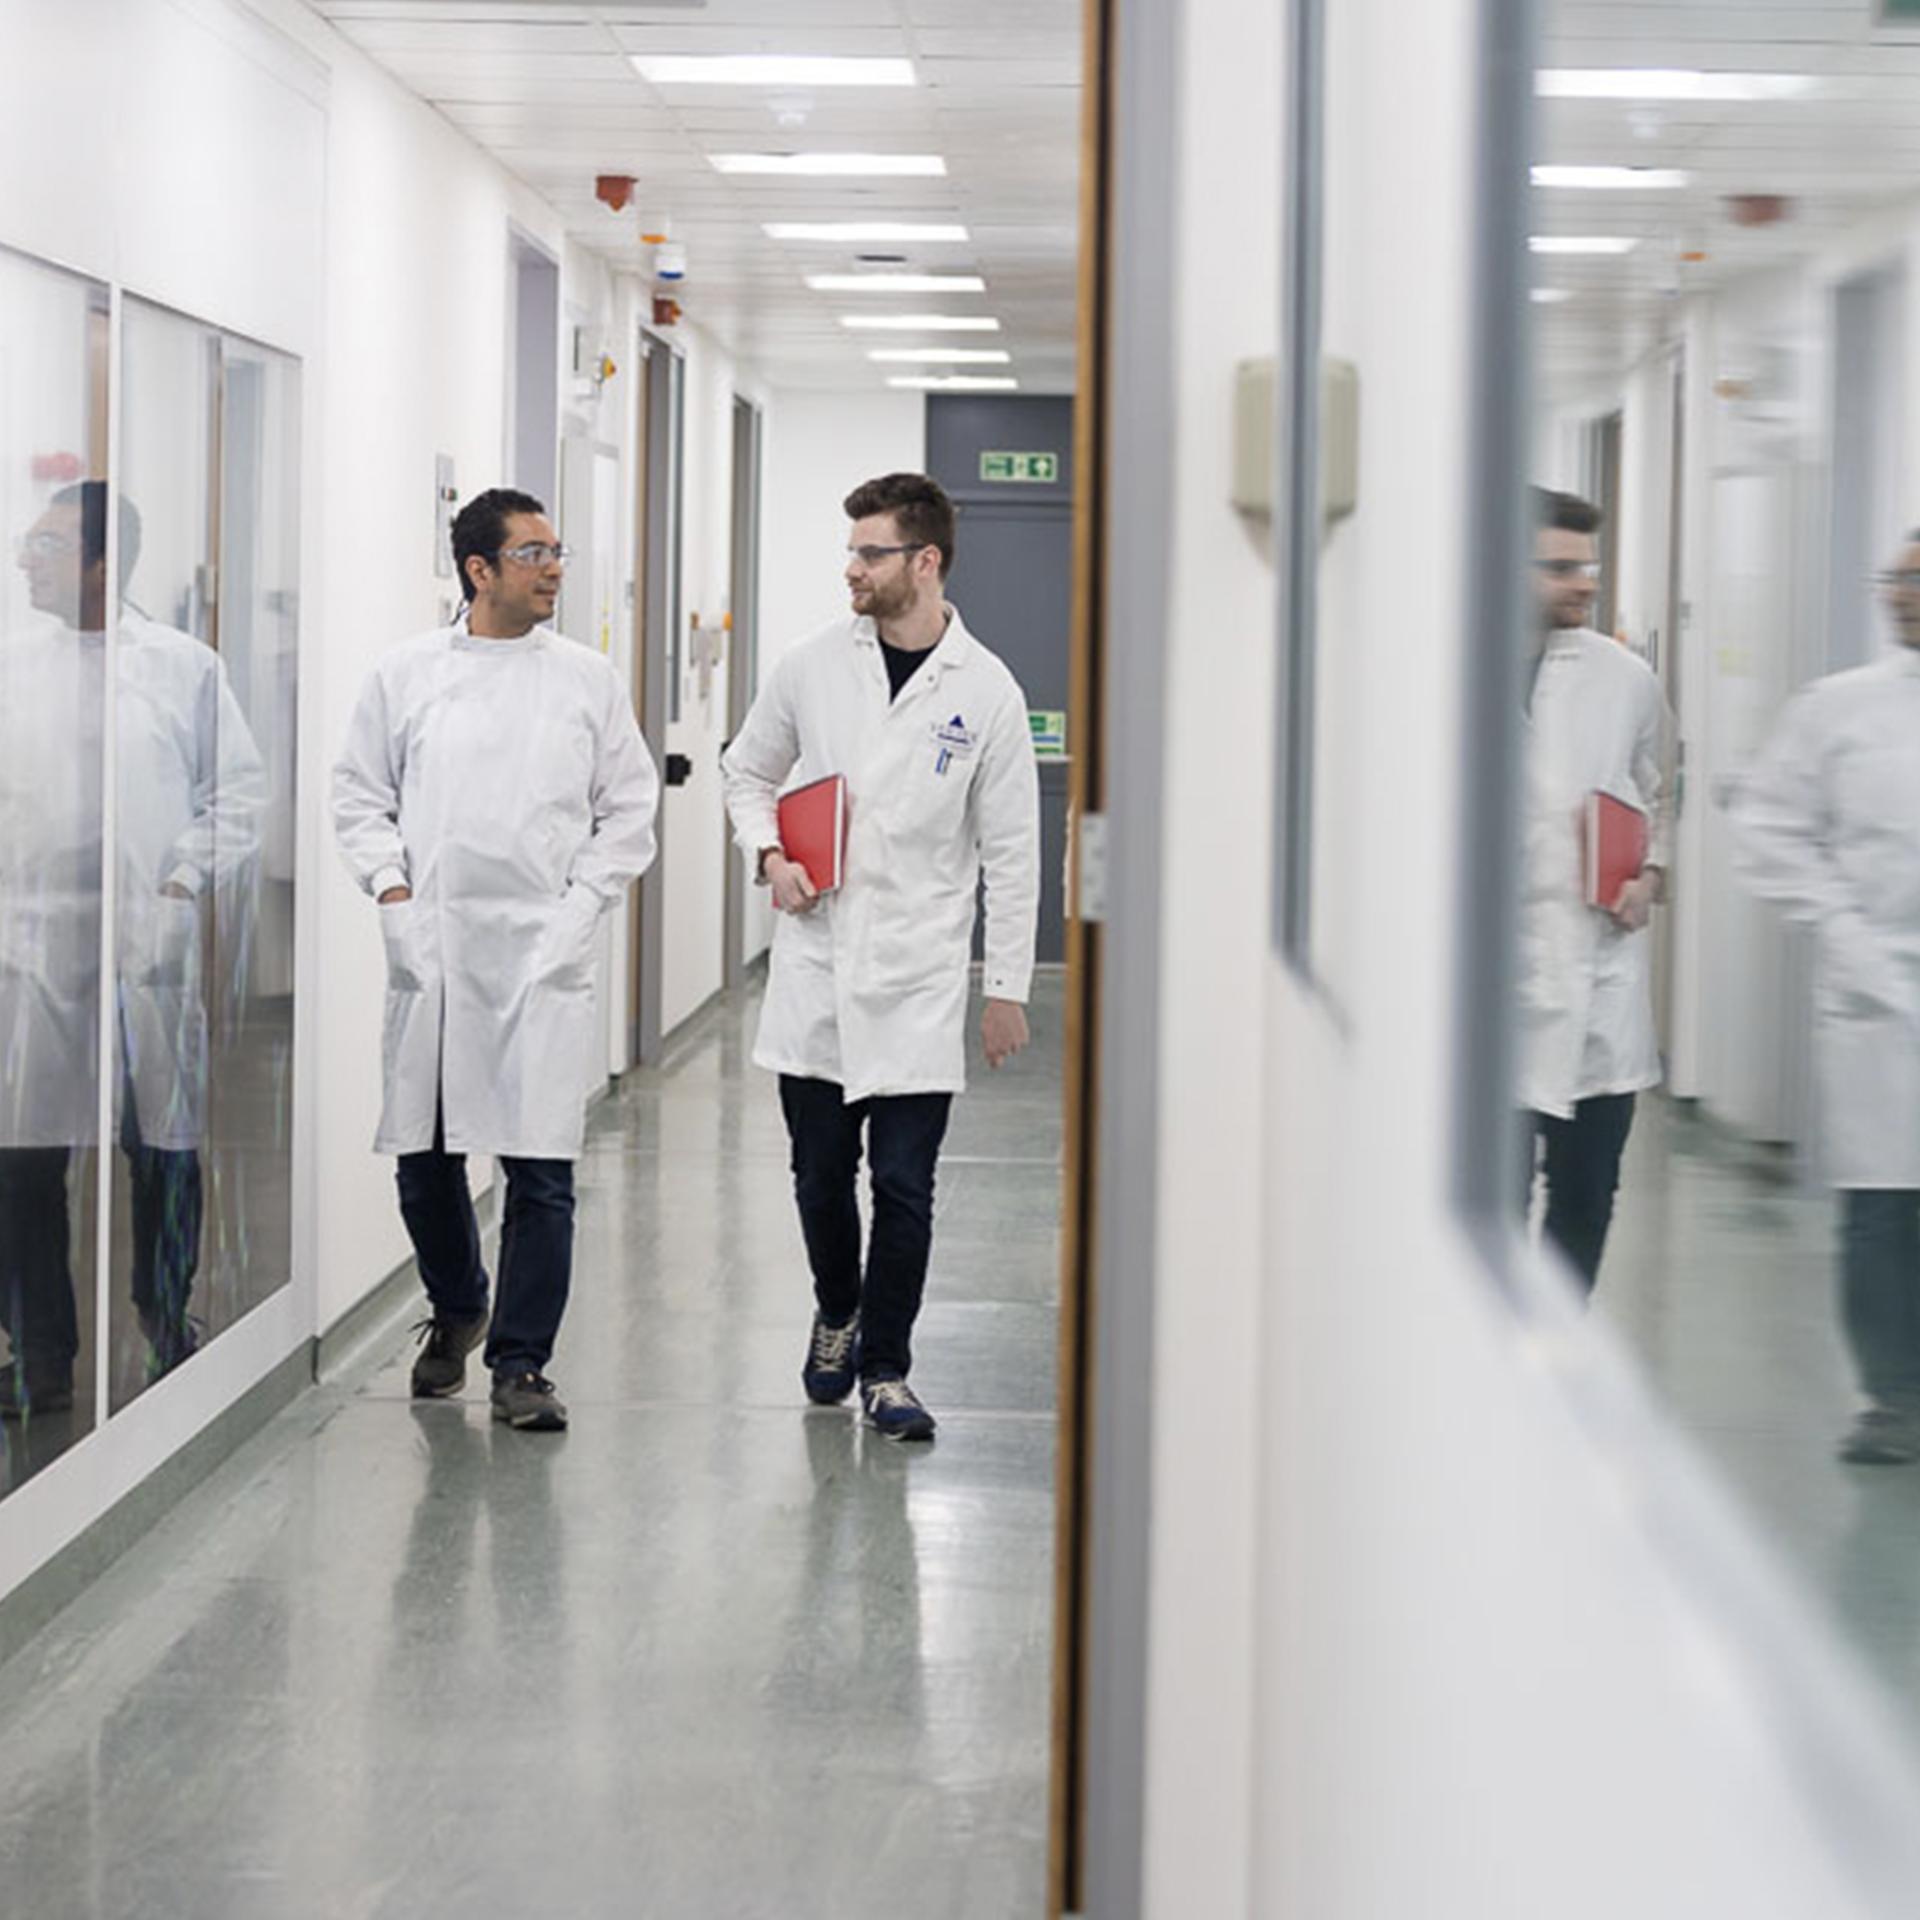 Two Vertex employees in white lab coats walk down a hallway together